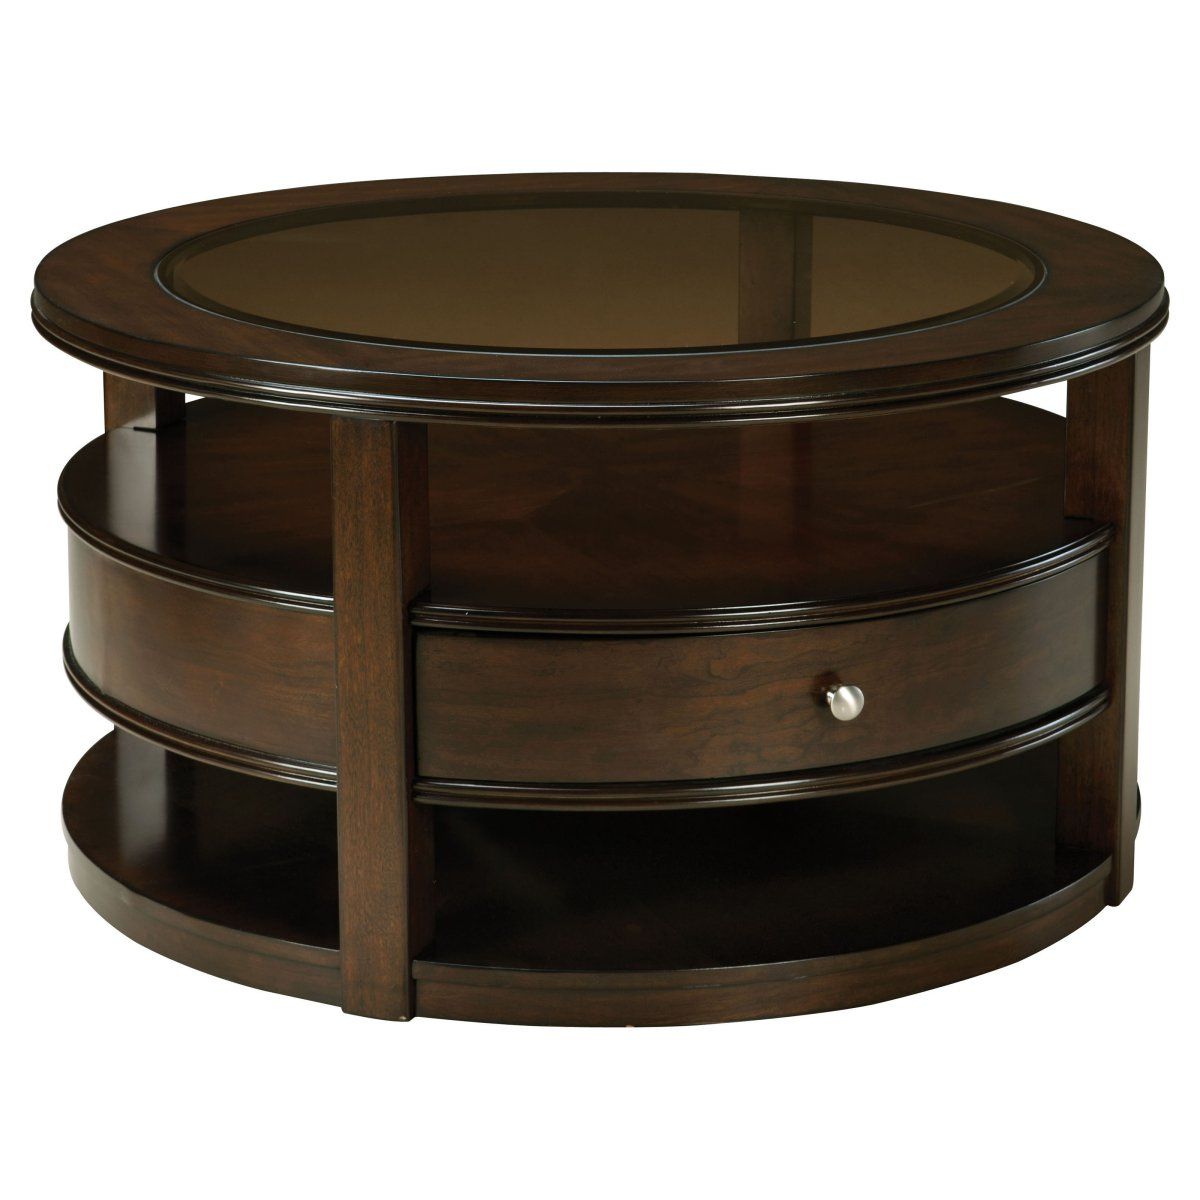 Awesome Round Coffee Tables With Storage – Homesfeed Pertaining To Round Coffee Tables With Storage (View 3 of 15)